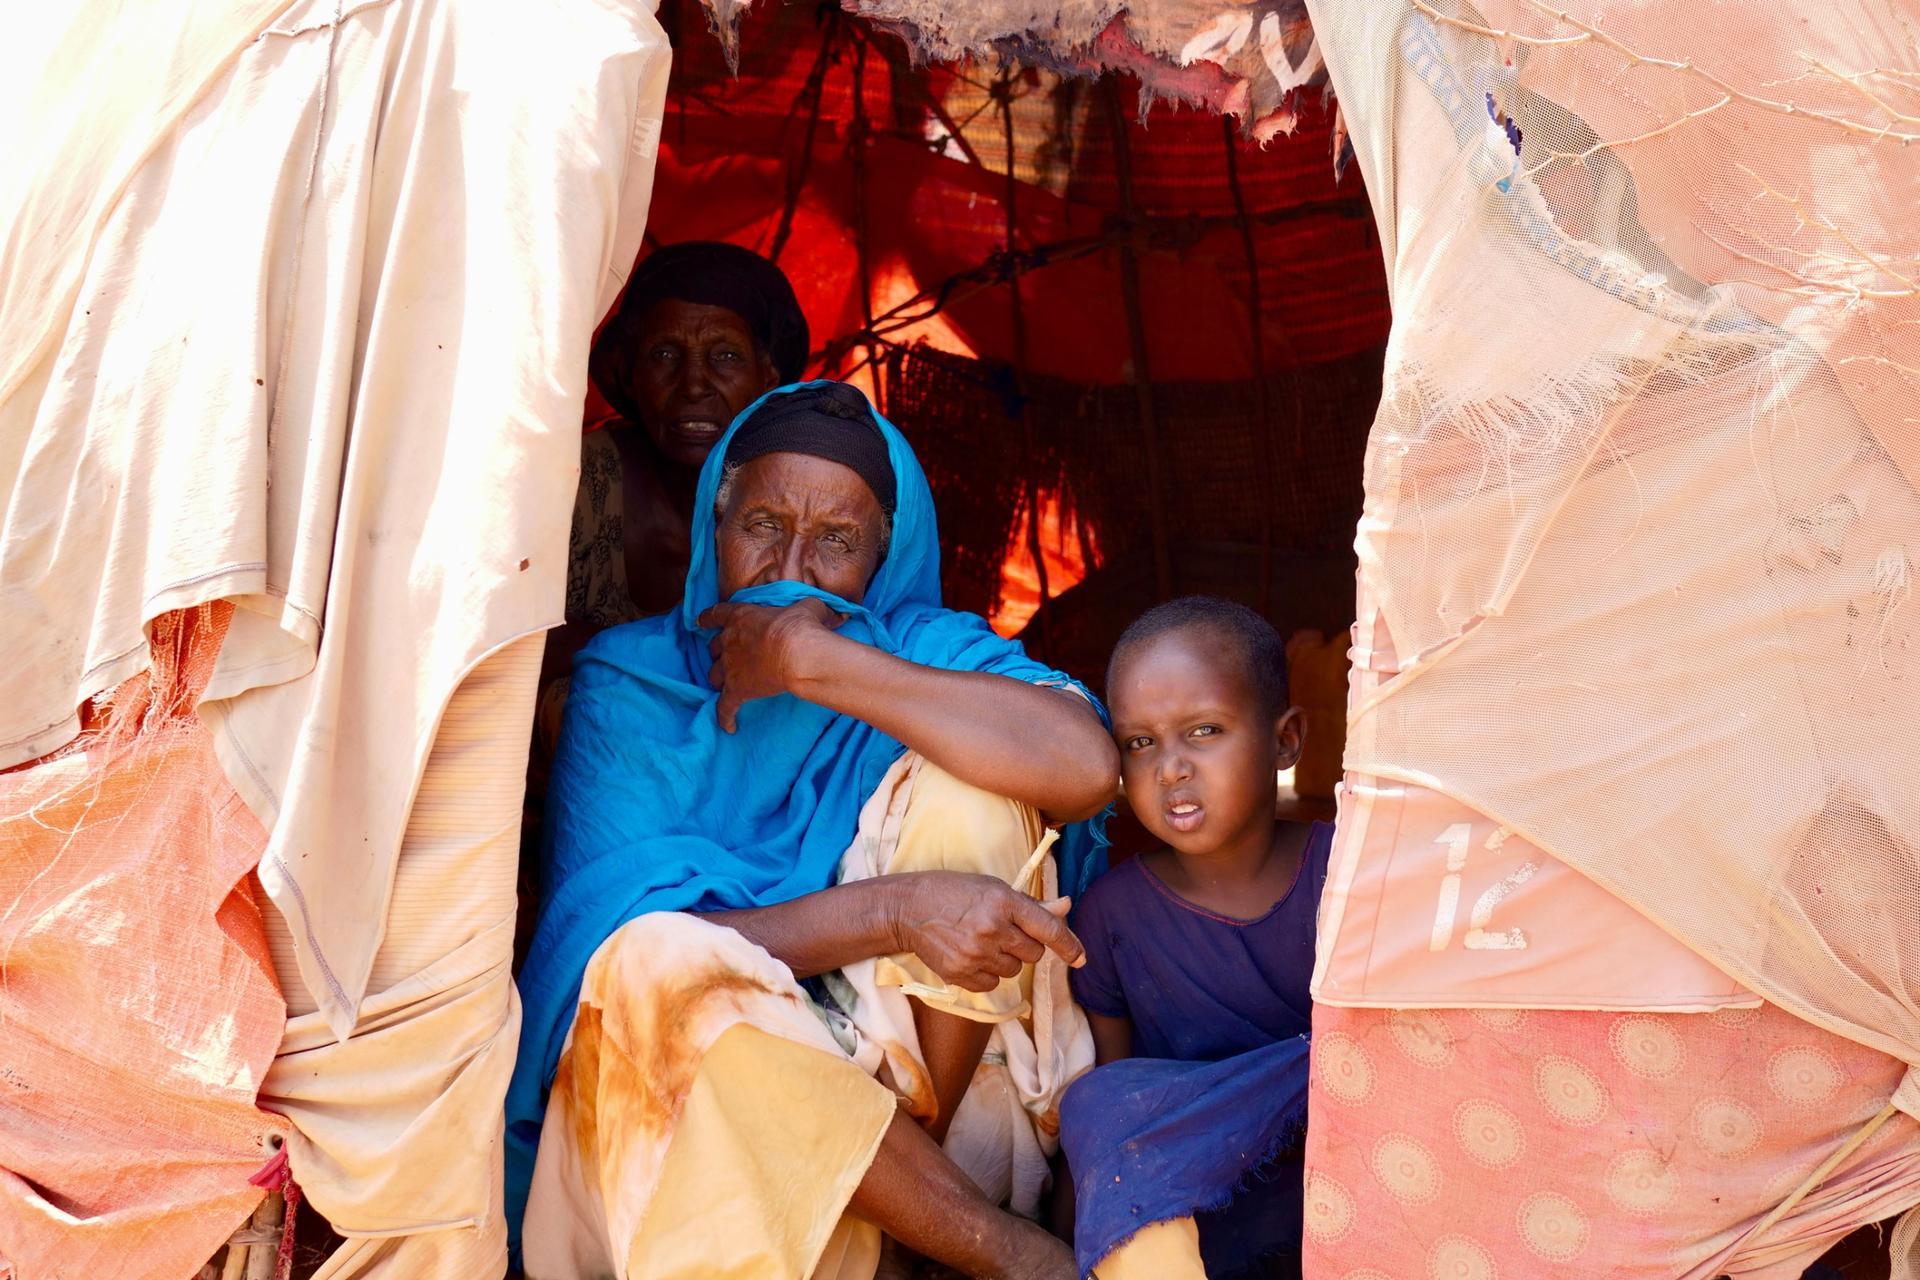 Daruuro Hassan with her family at a camp for internally displaced people in Luuq, Somalia, March 21, 2022.